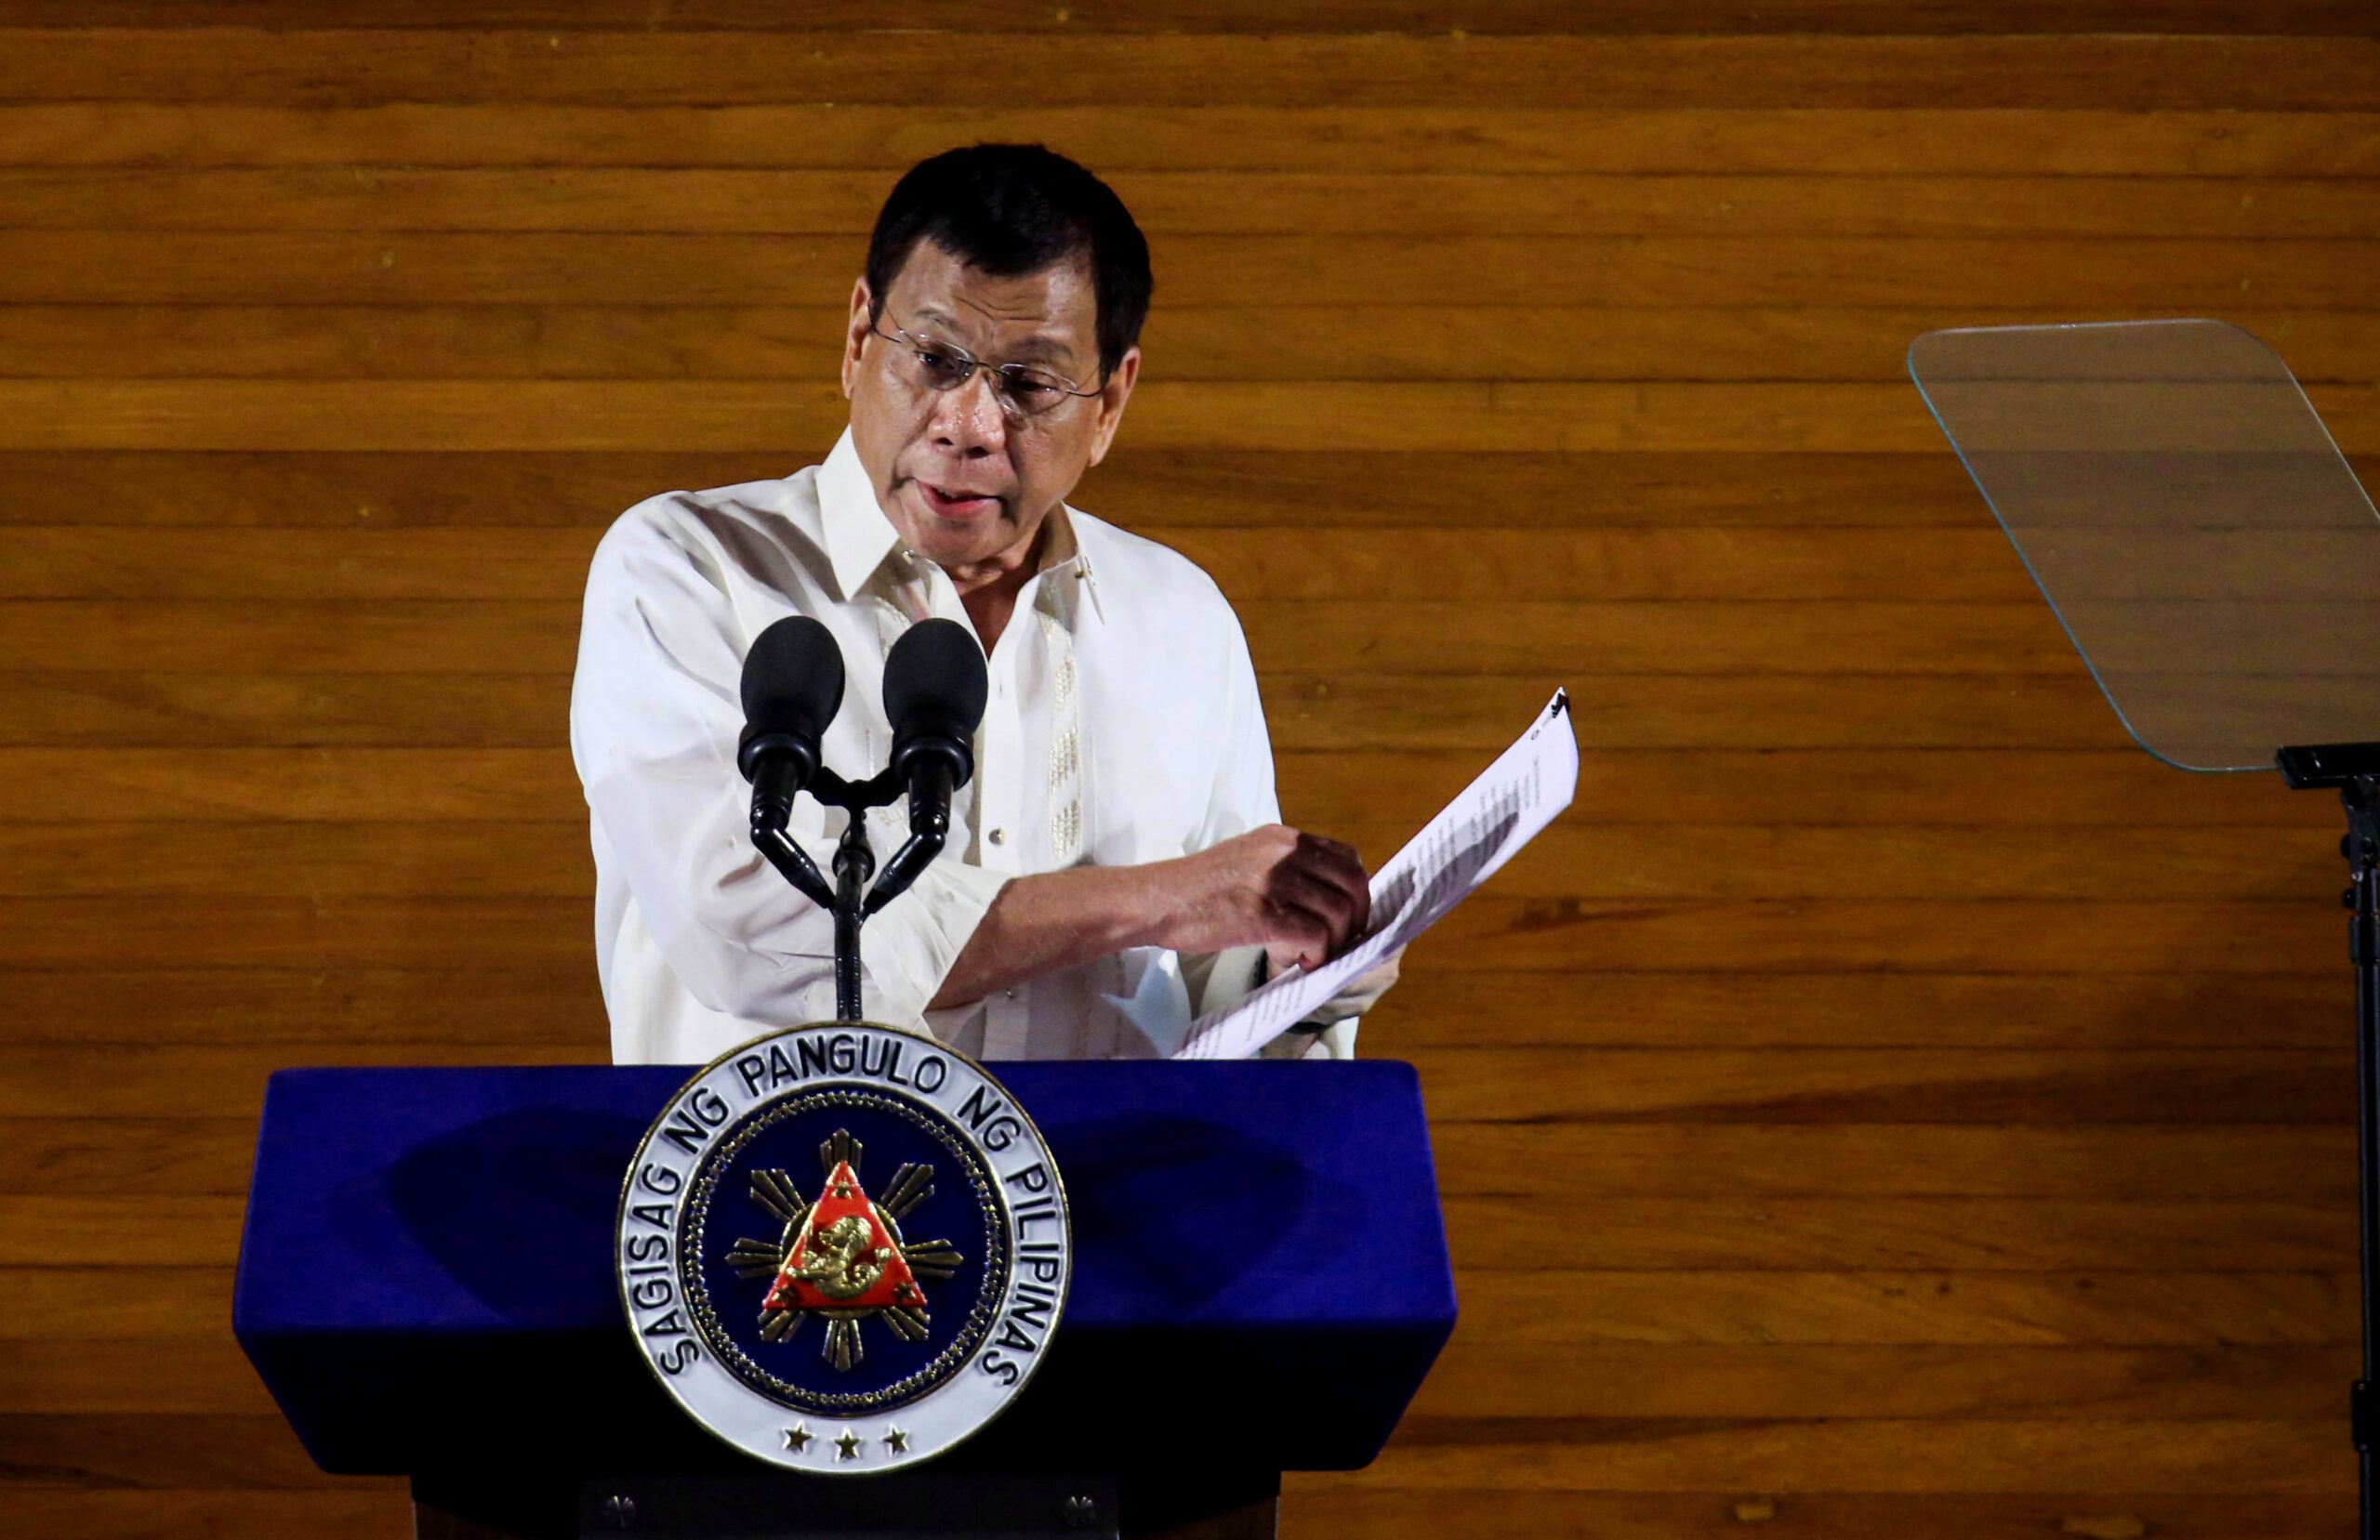 Freedom of information: What’s lacking in Duterte’s EO?